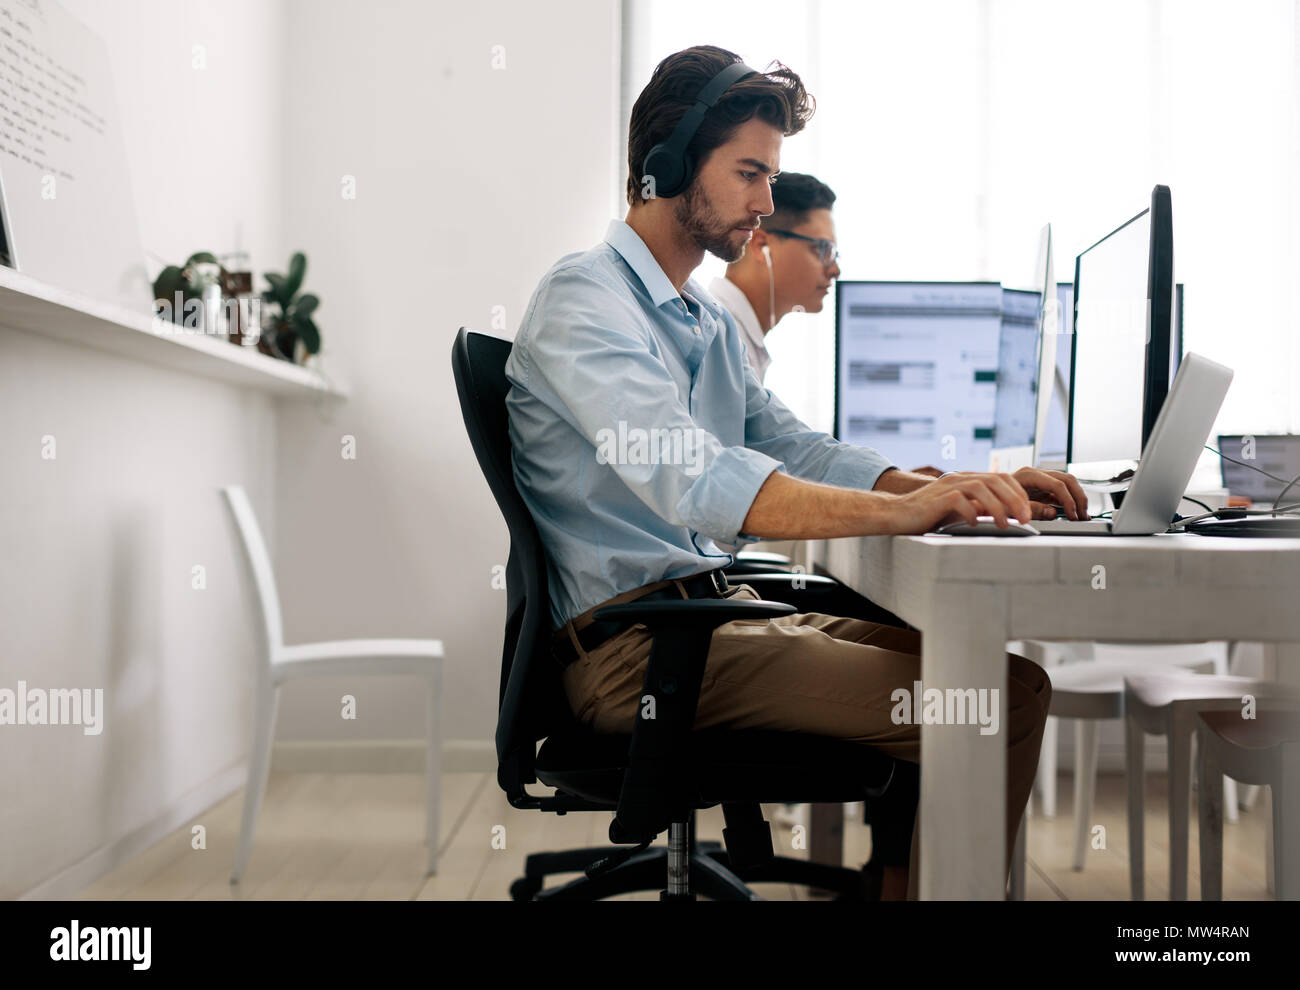 Software developers sitting at office working on computers wearing headphones. Application developer working on a laptop in office. Stock Photo